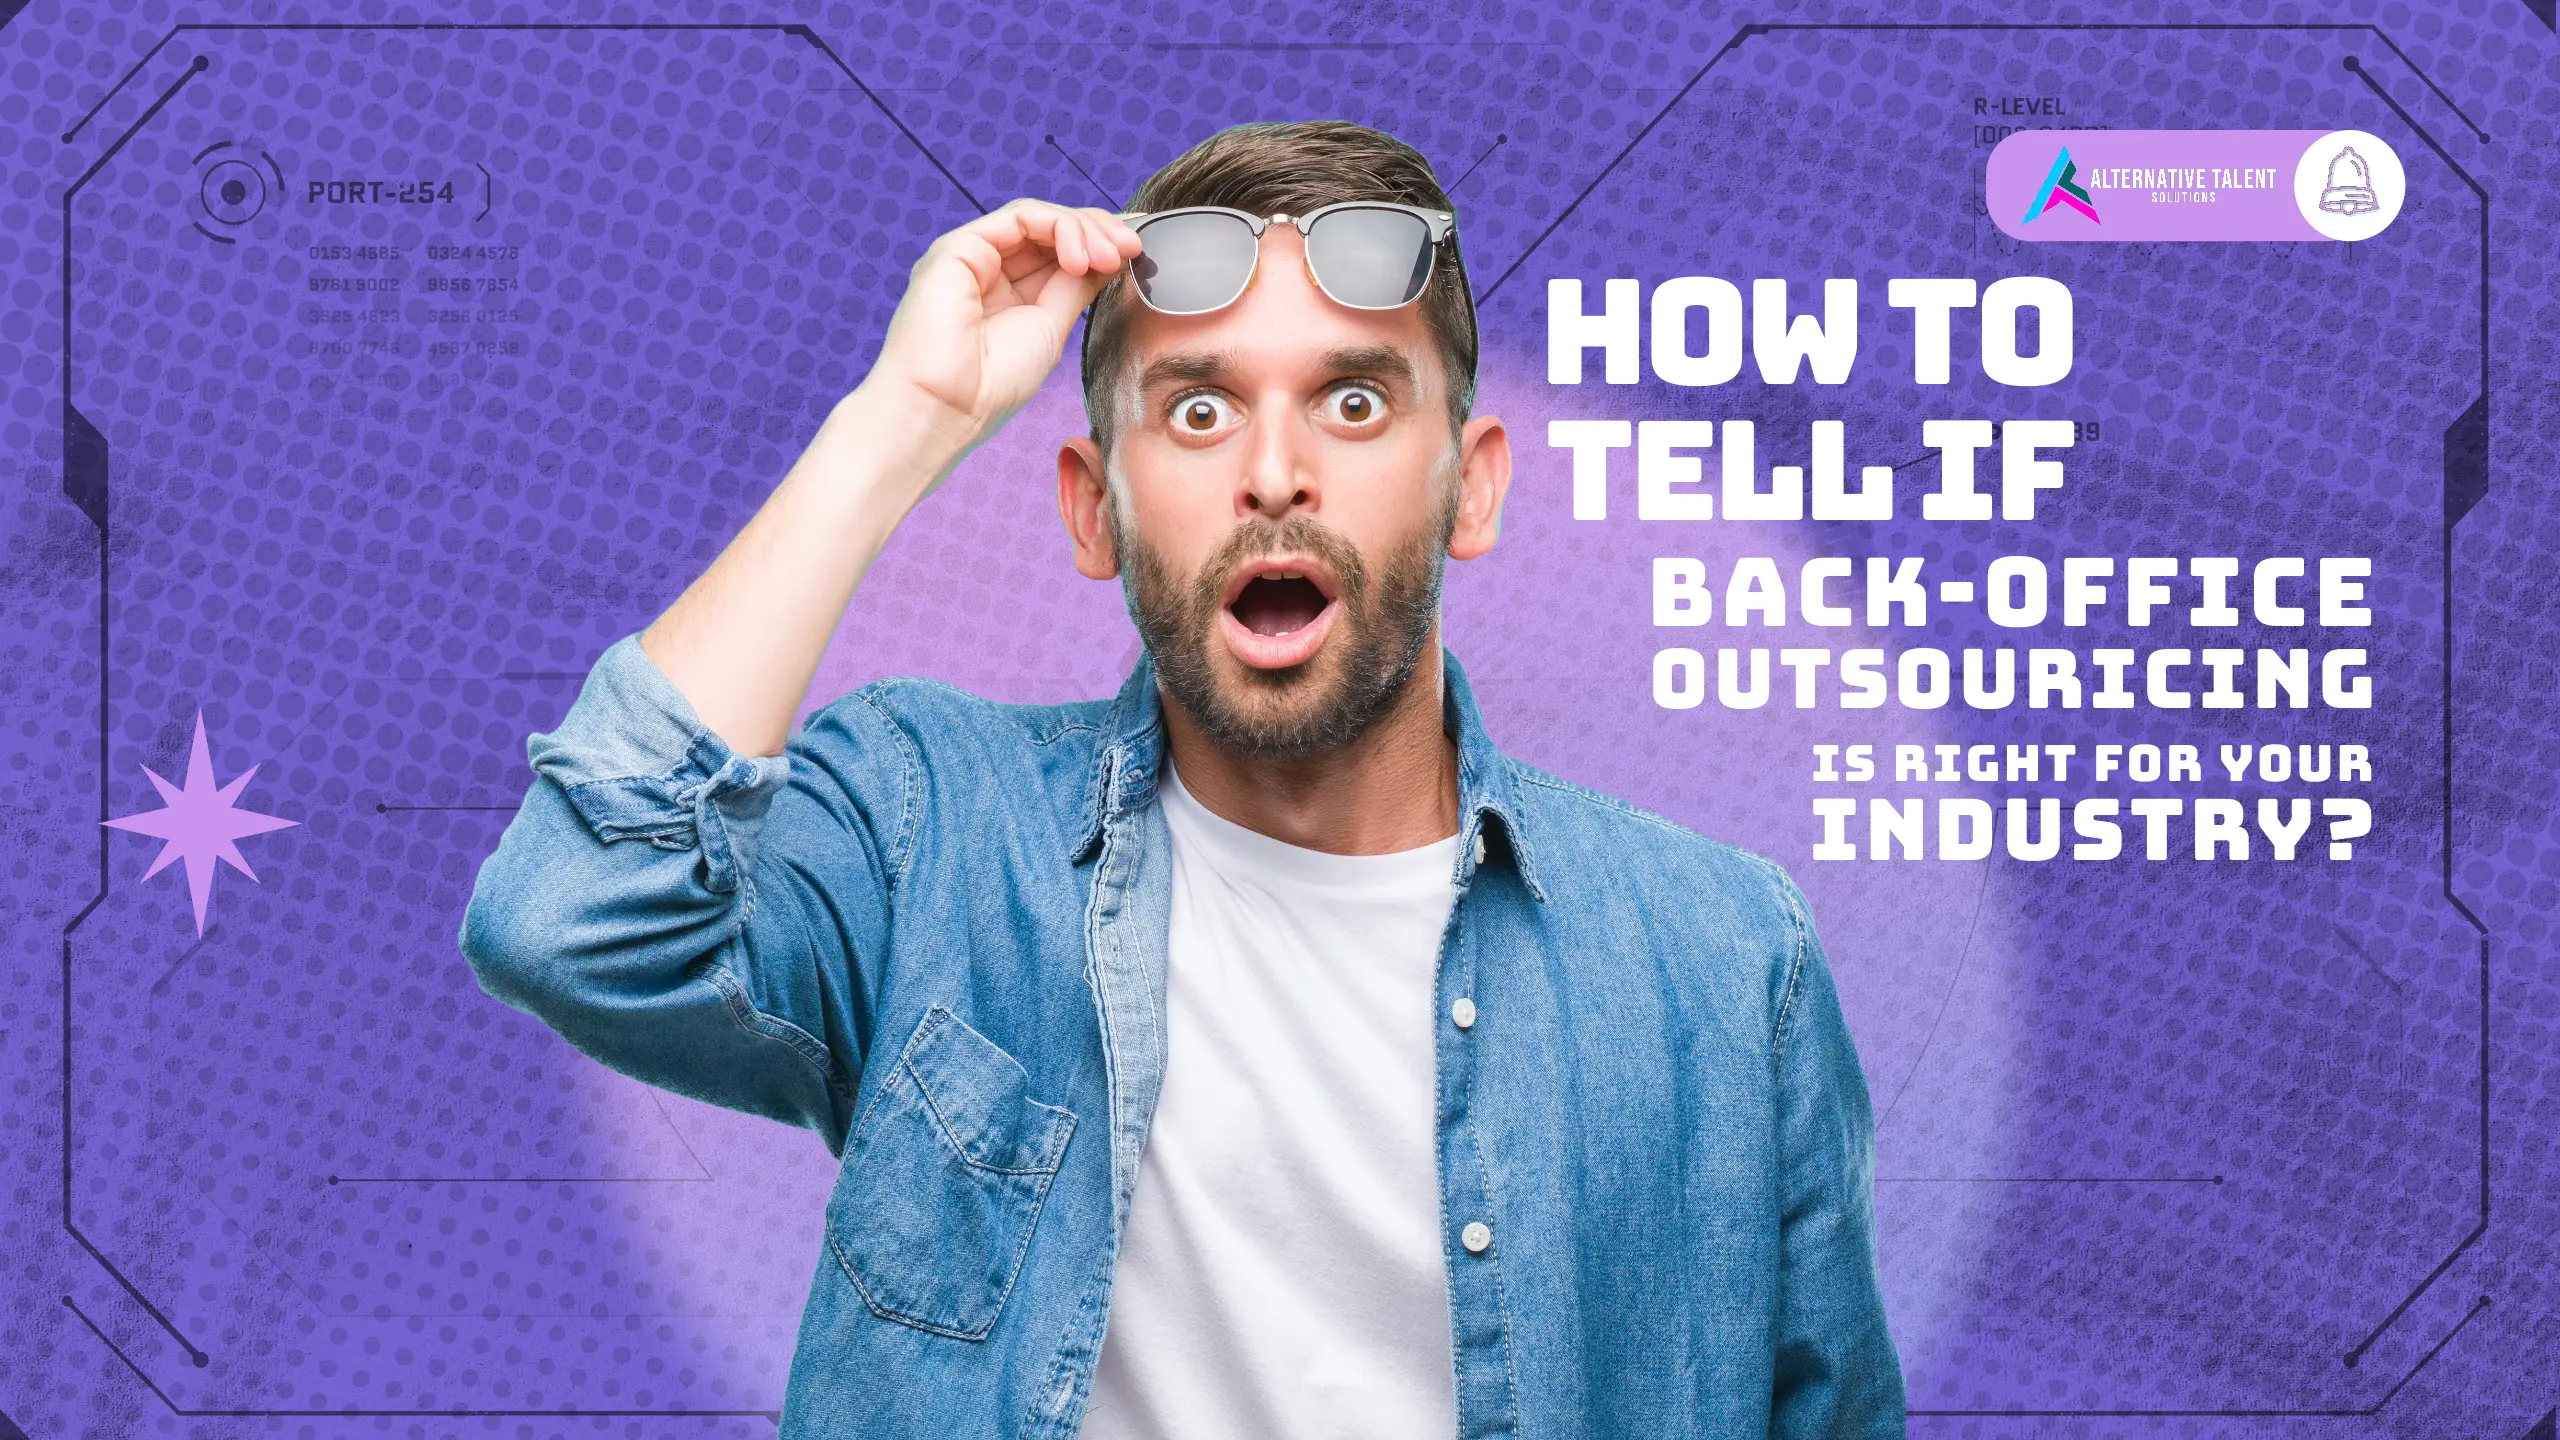 Is Back-Office Outsourcing Right for Your Industry? Here's How to Tell"